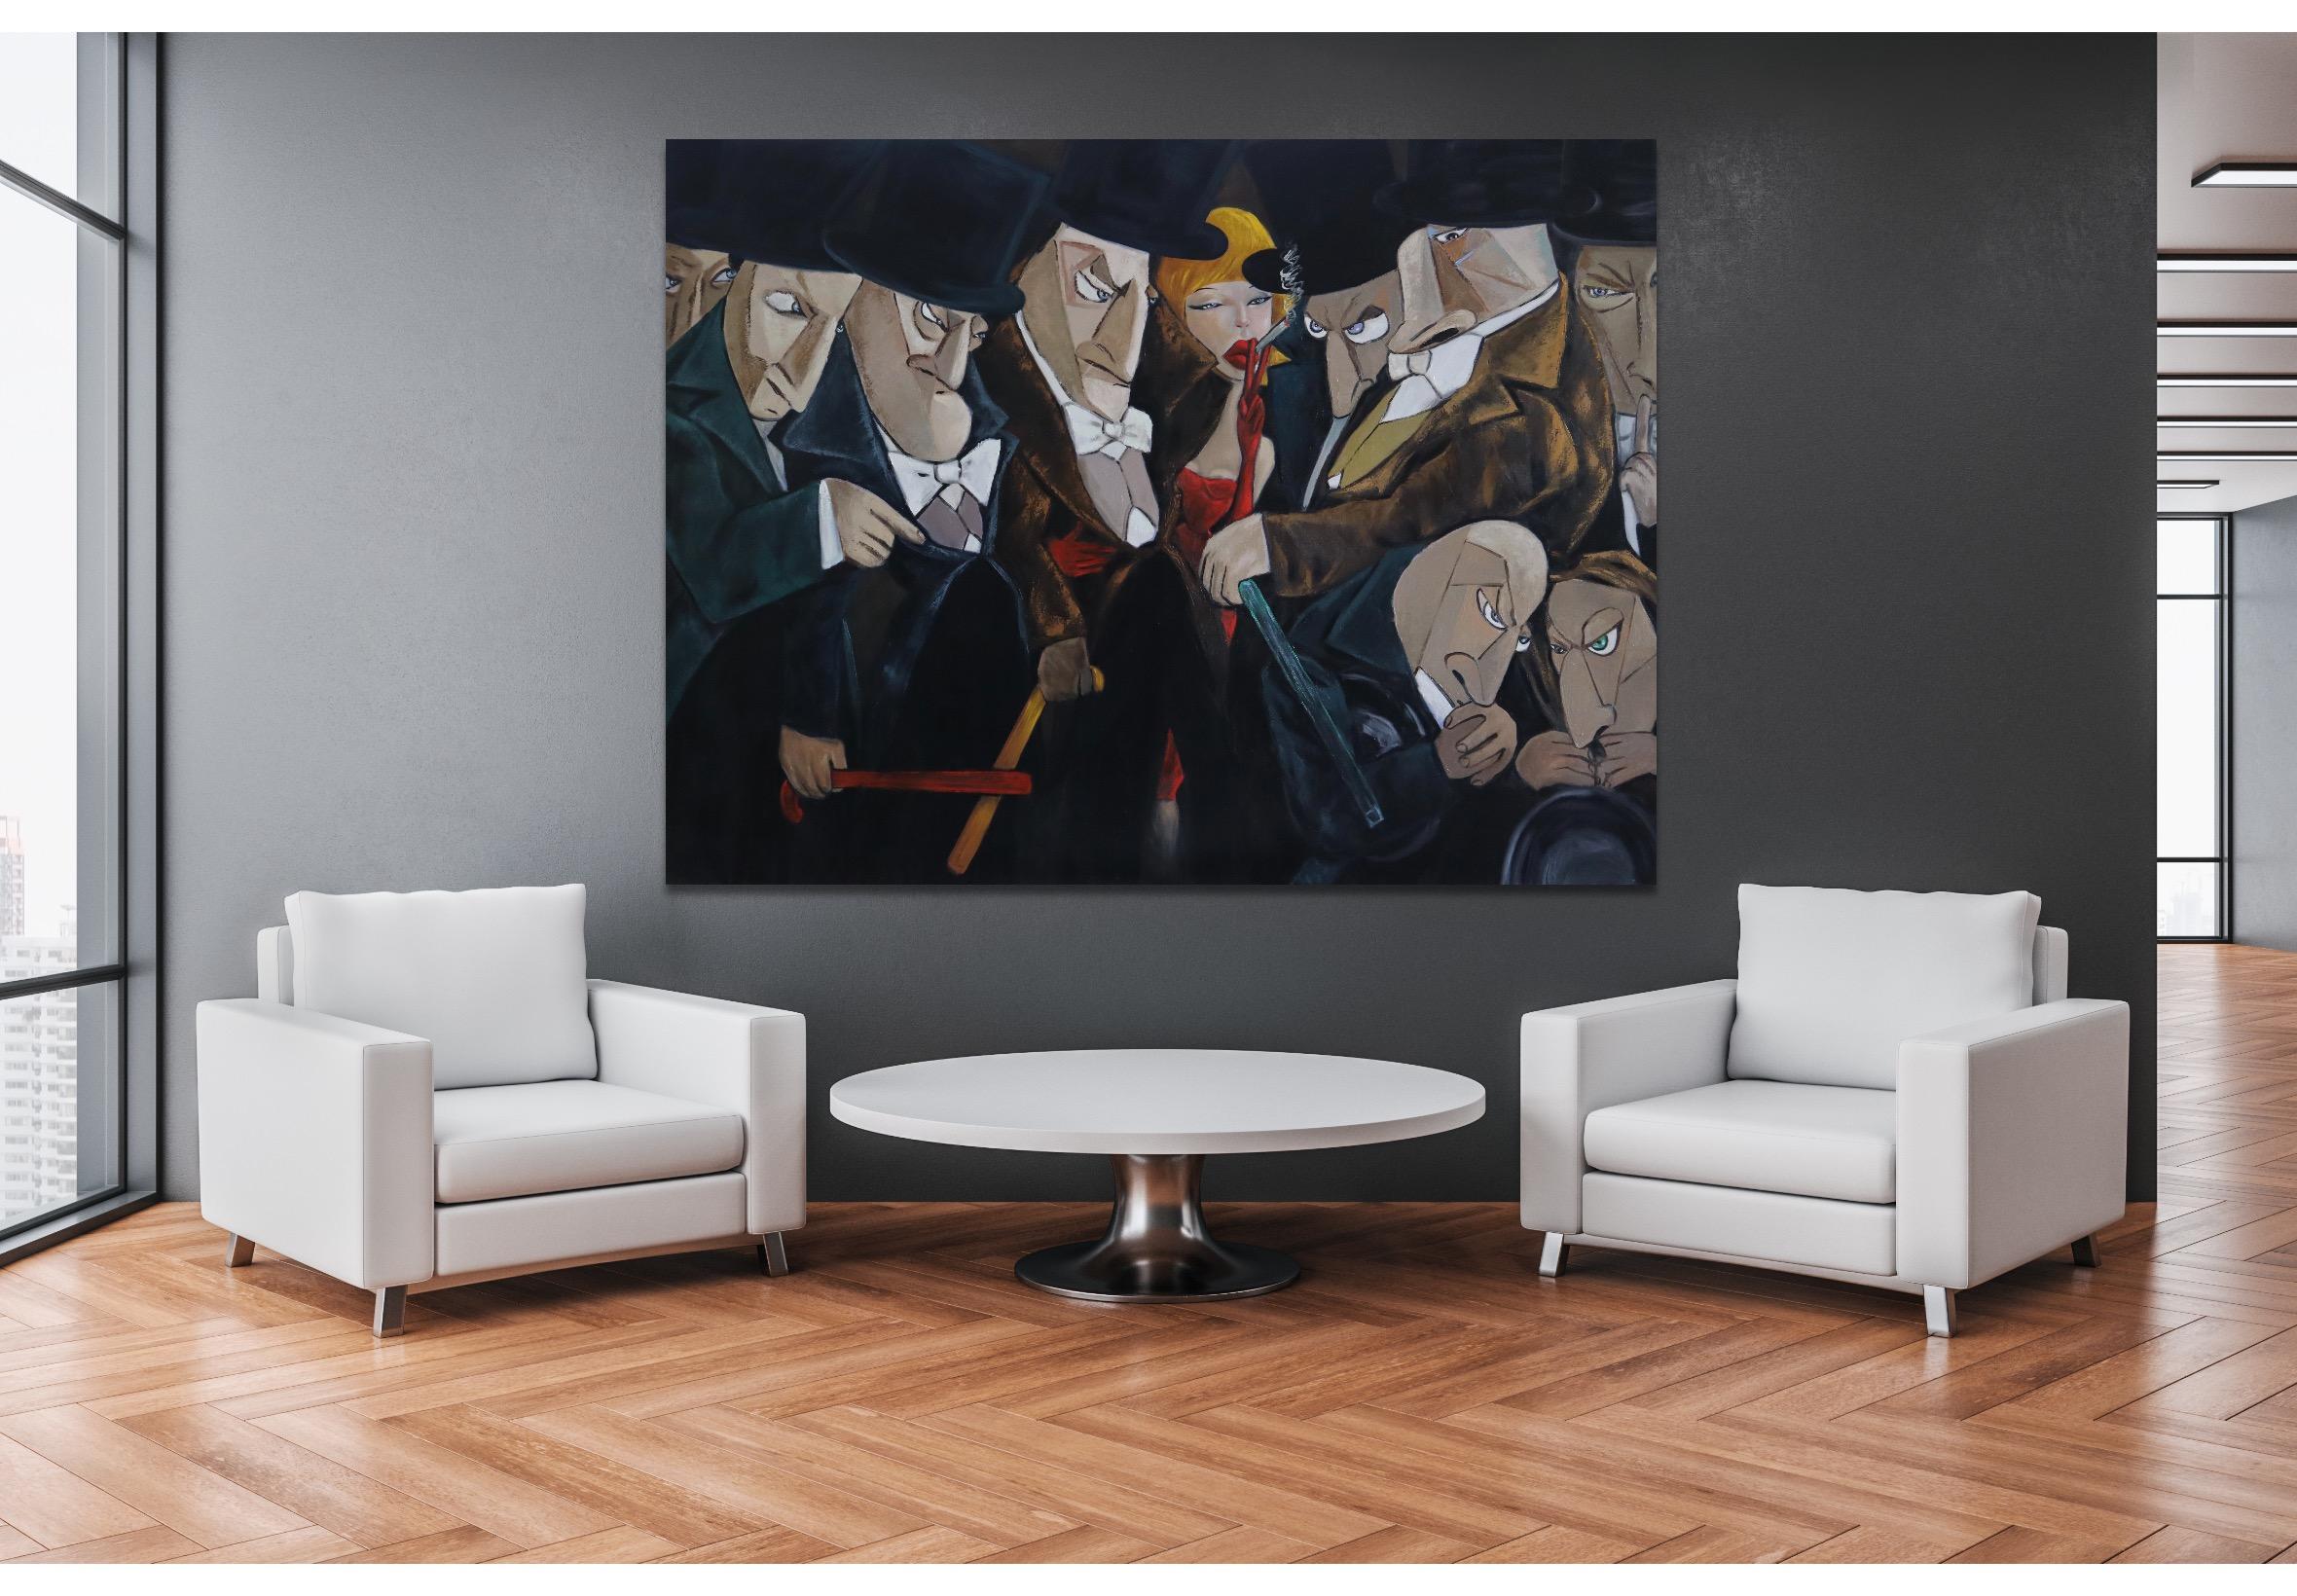 Top Hat and Tails, Original Figurative Oil Painting 150x200 cm by Ta Byrne For Sale 3